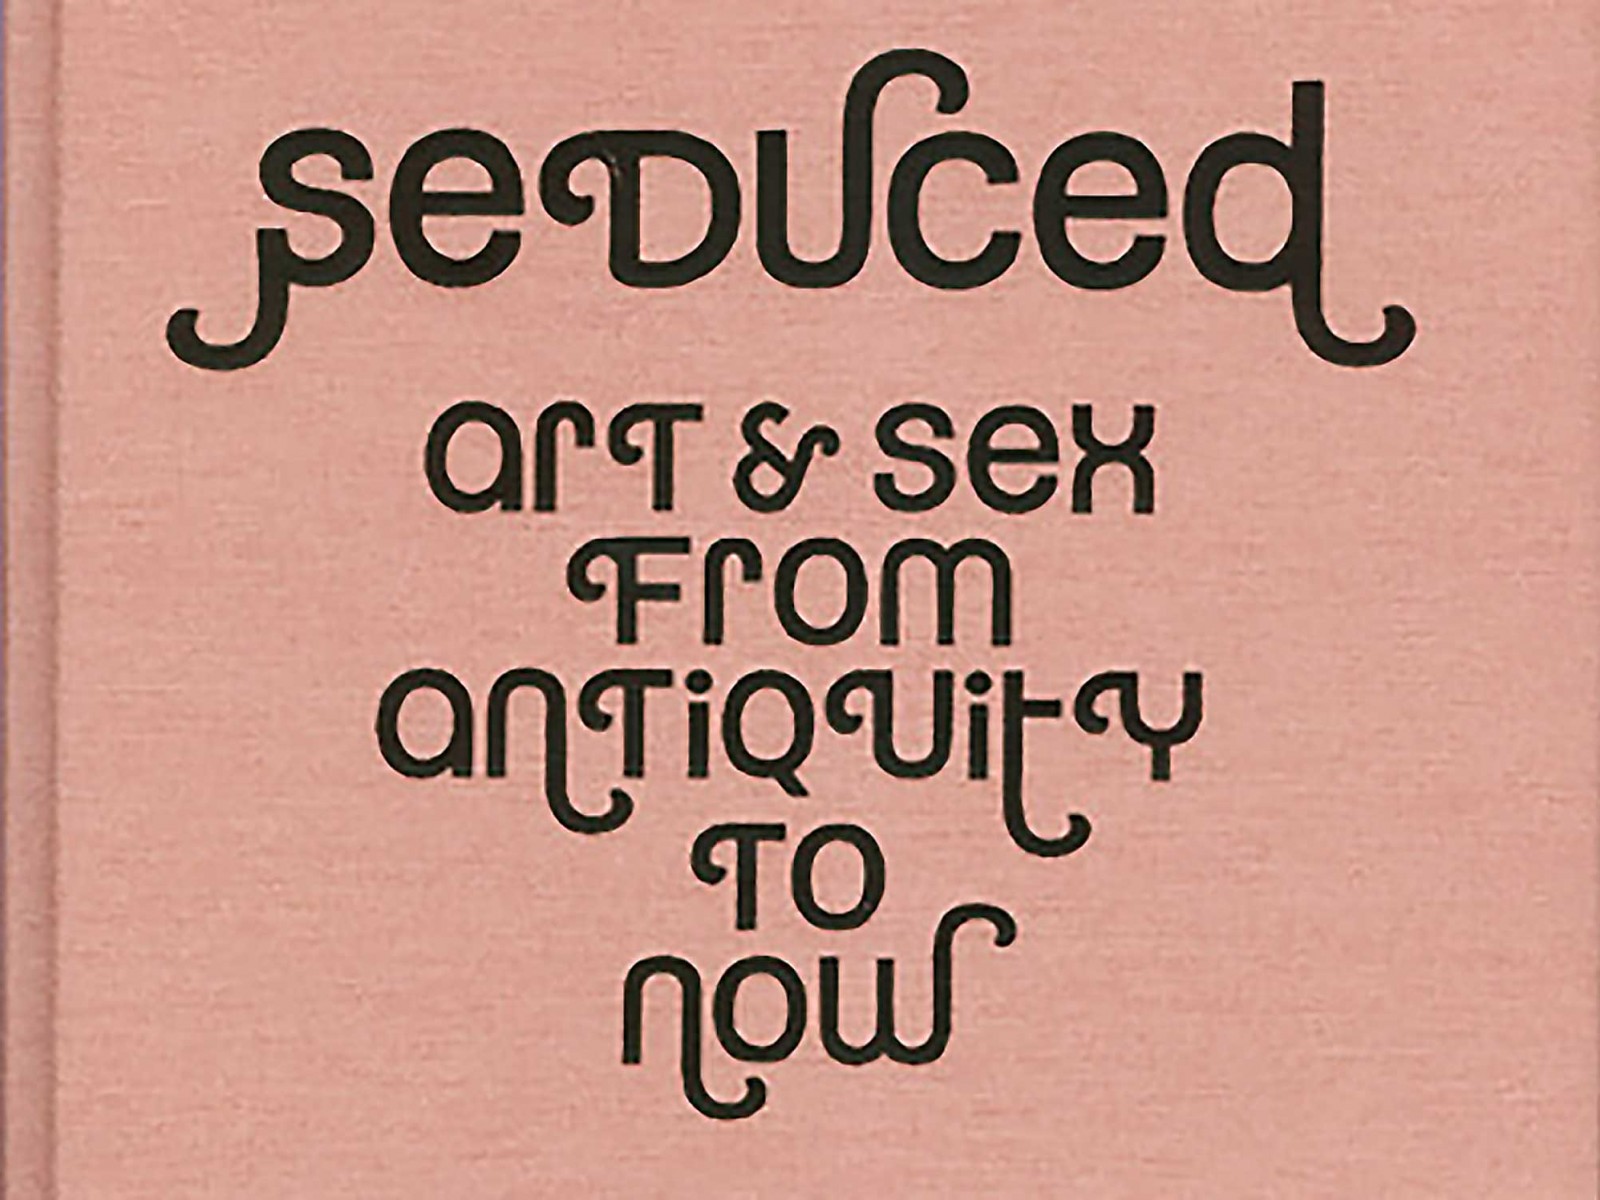 Seduced: Art and Sex from Antiquity to Now at Barbican